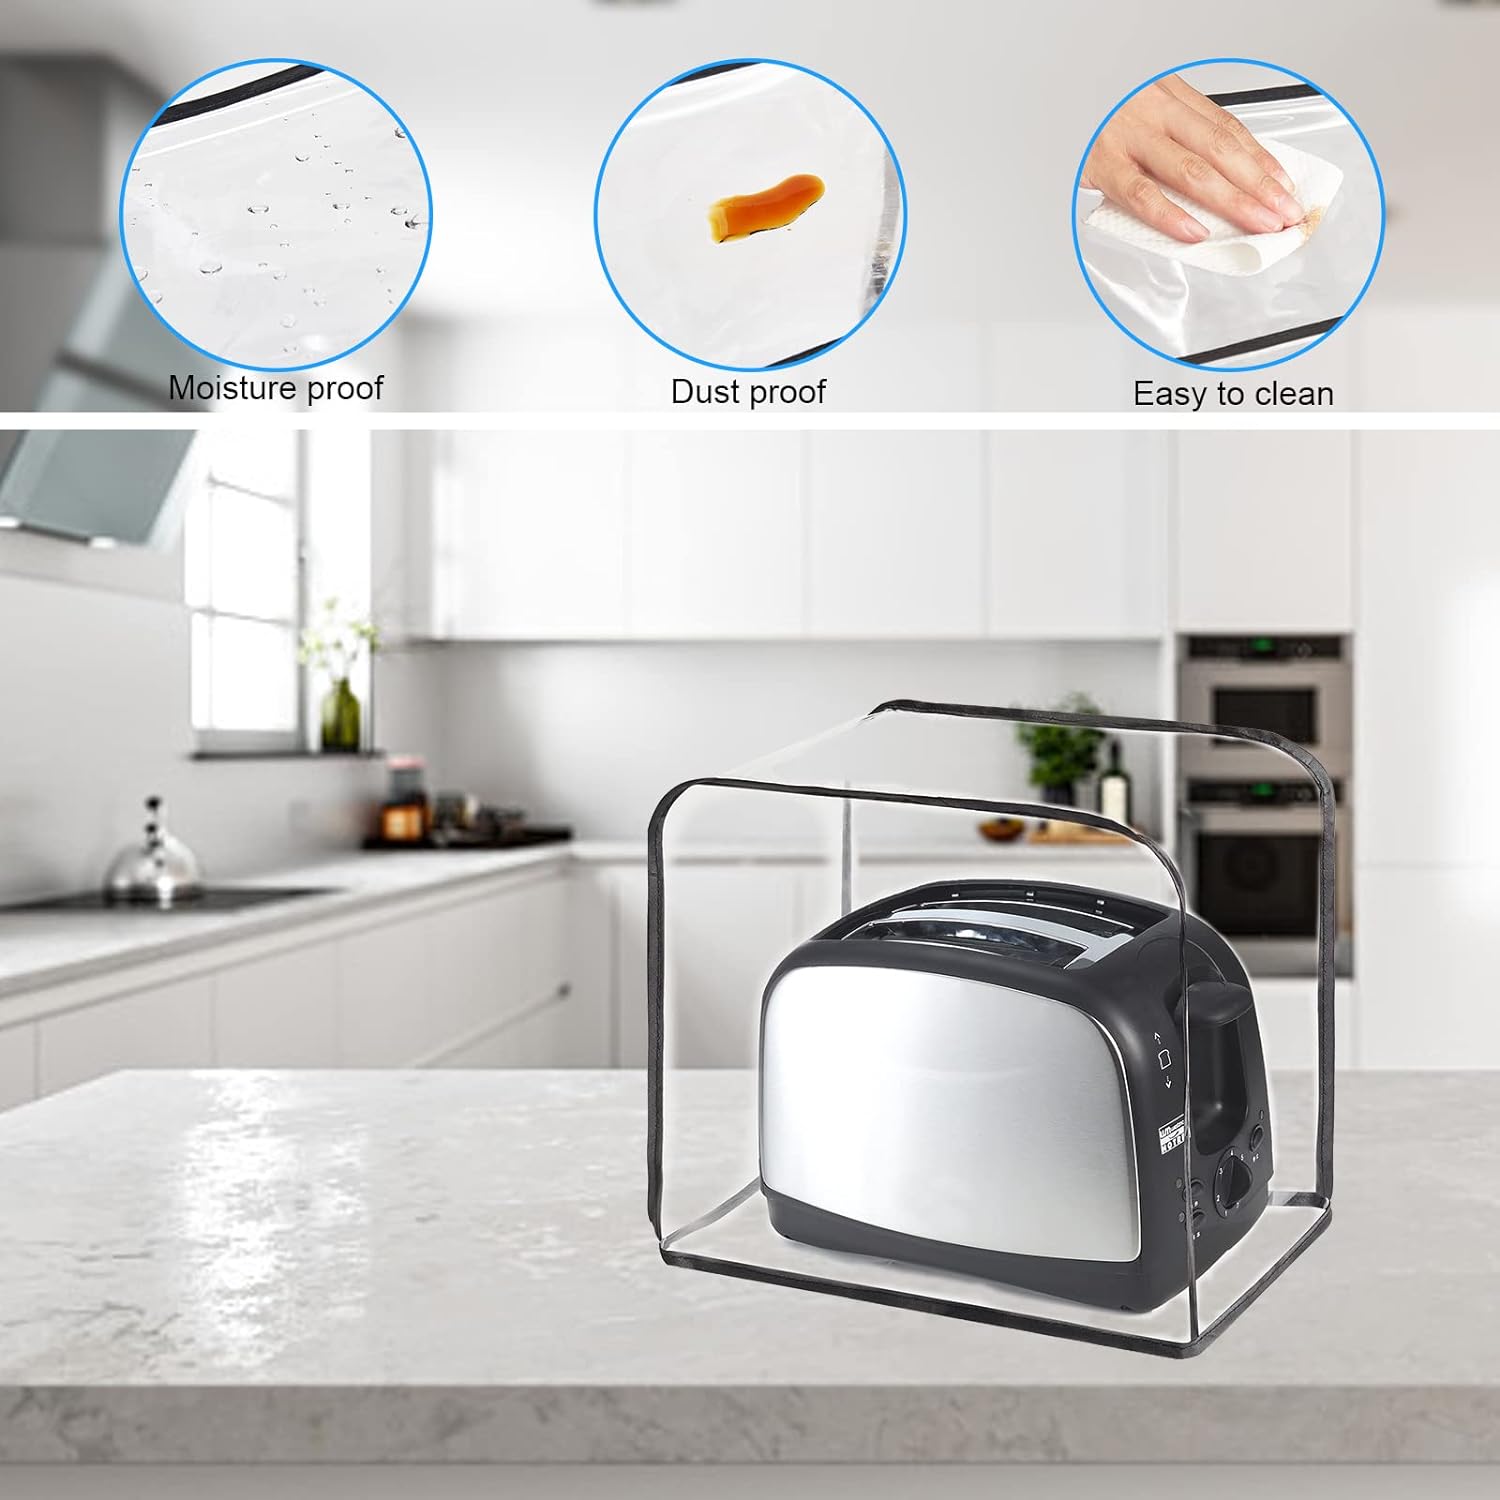 CEMGYIUK Toaster Cover,Waterproof Toaster Cover 2 Slice Bread Maker Cover,Kitchen Small Appliance Covers,Clear Toaster Dust Cover,Toaste